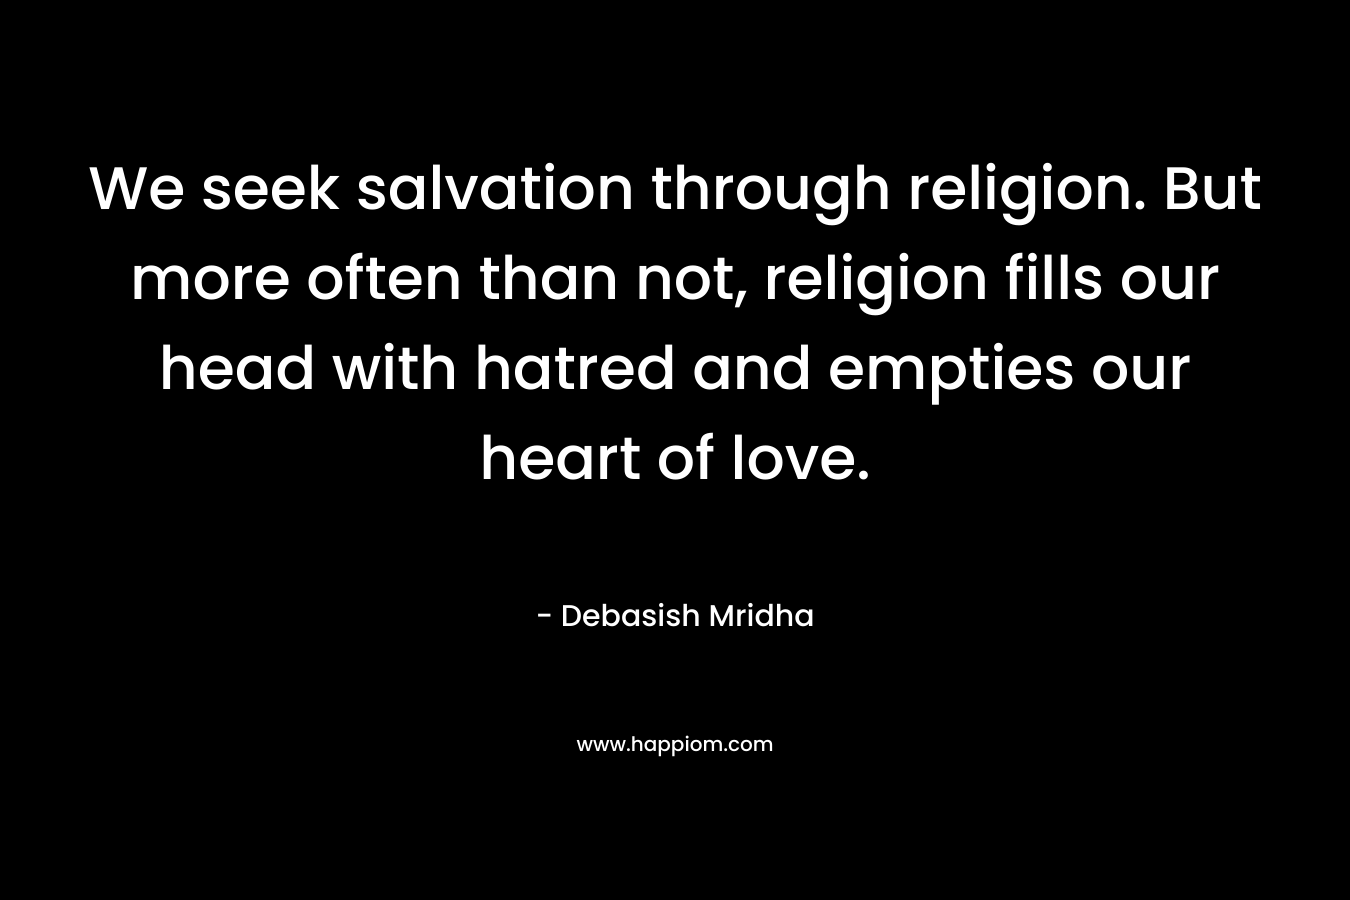 We seek salvation through religion. But more often than not, religion fills our head with hatred and empties our heart of love. – Debasish Mridha